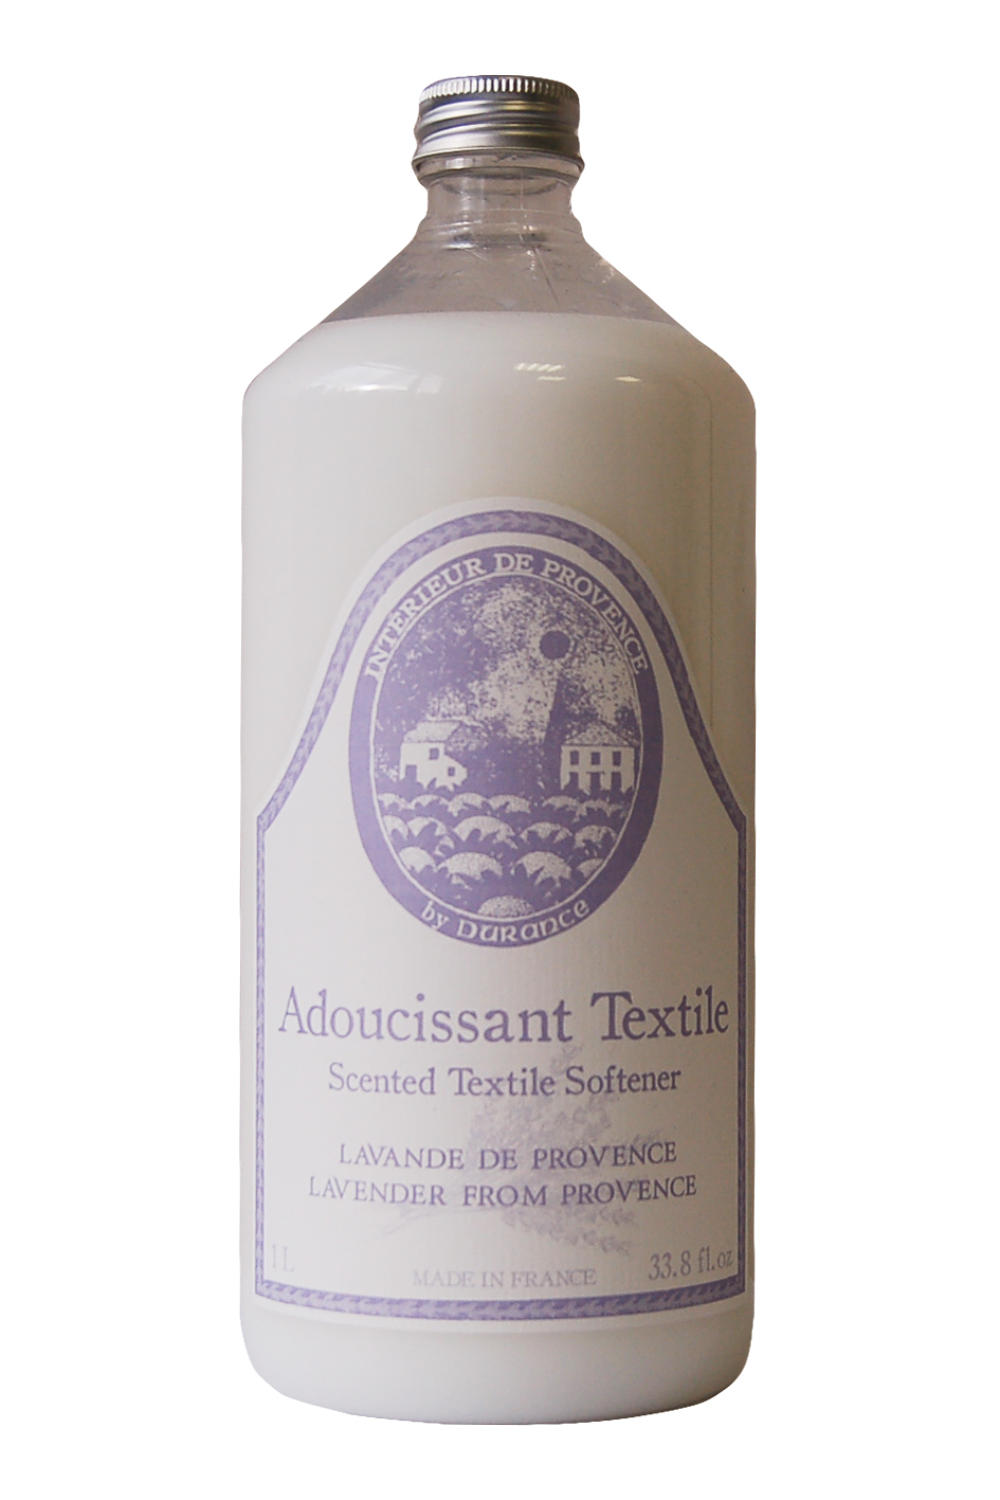 Scented textile softener - Lavender from Provence 33.8 fl.oz